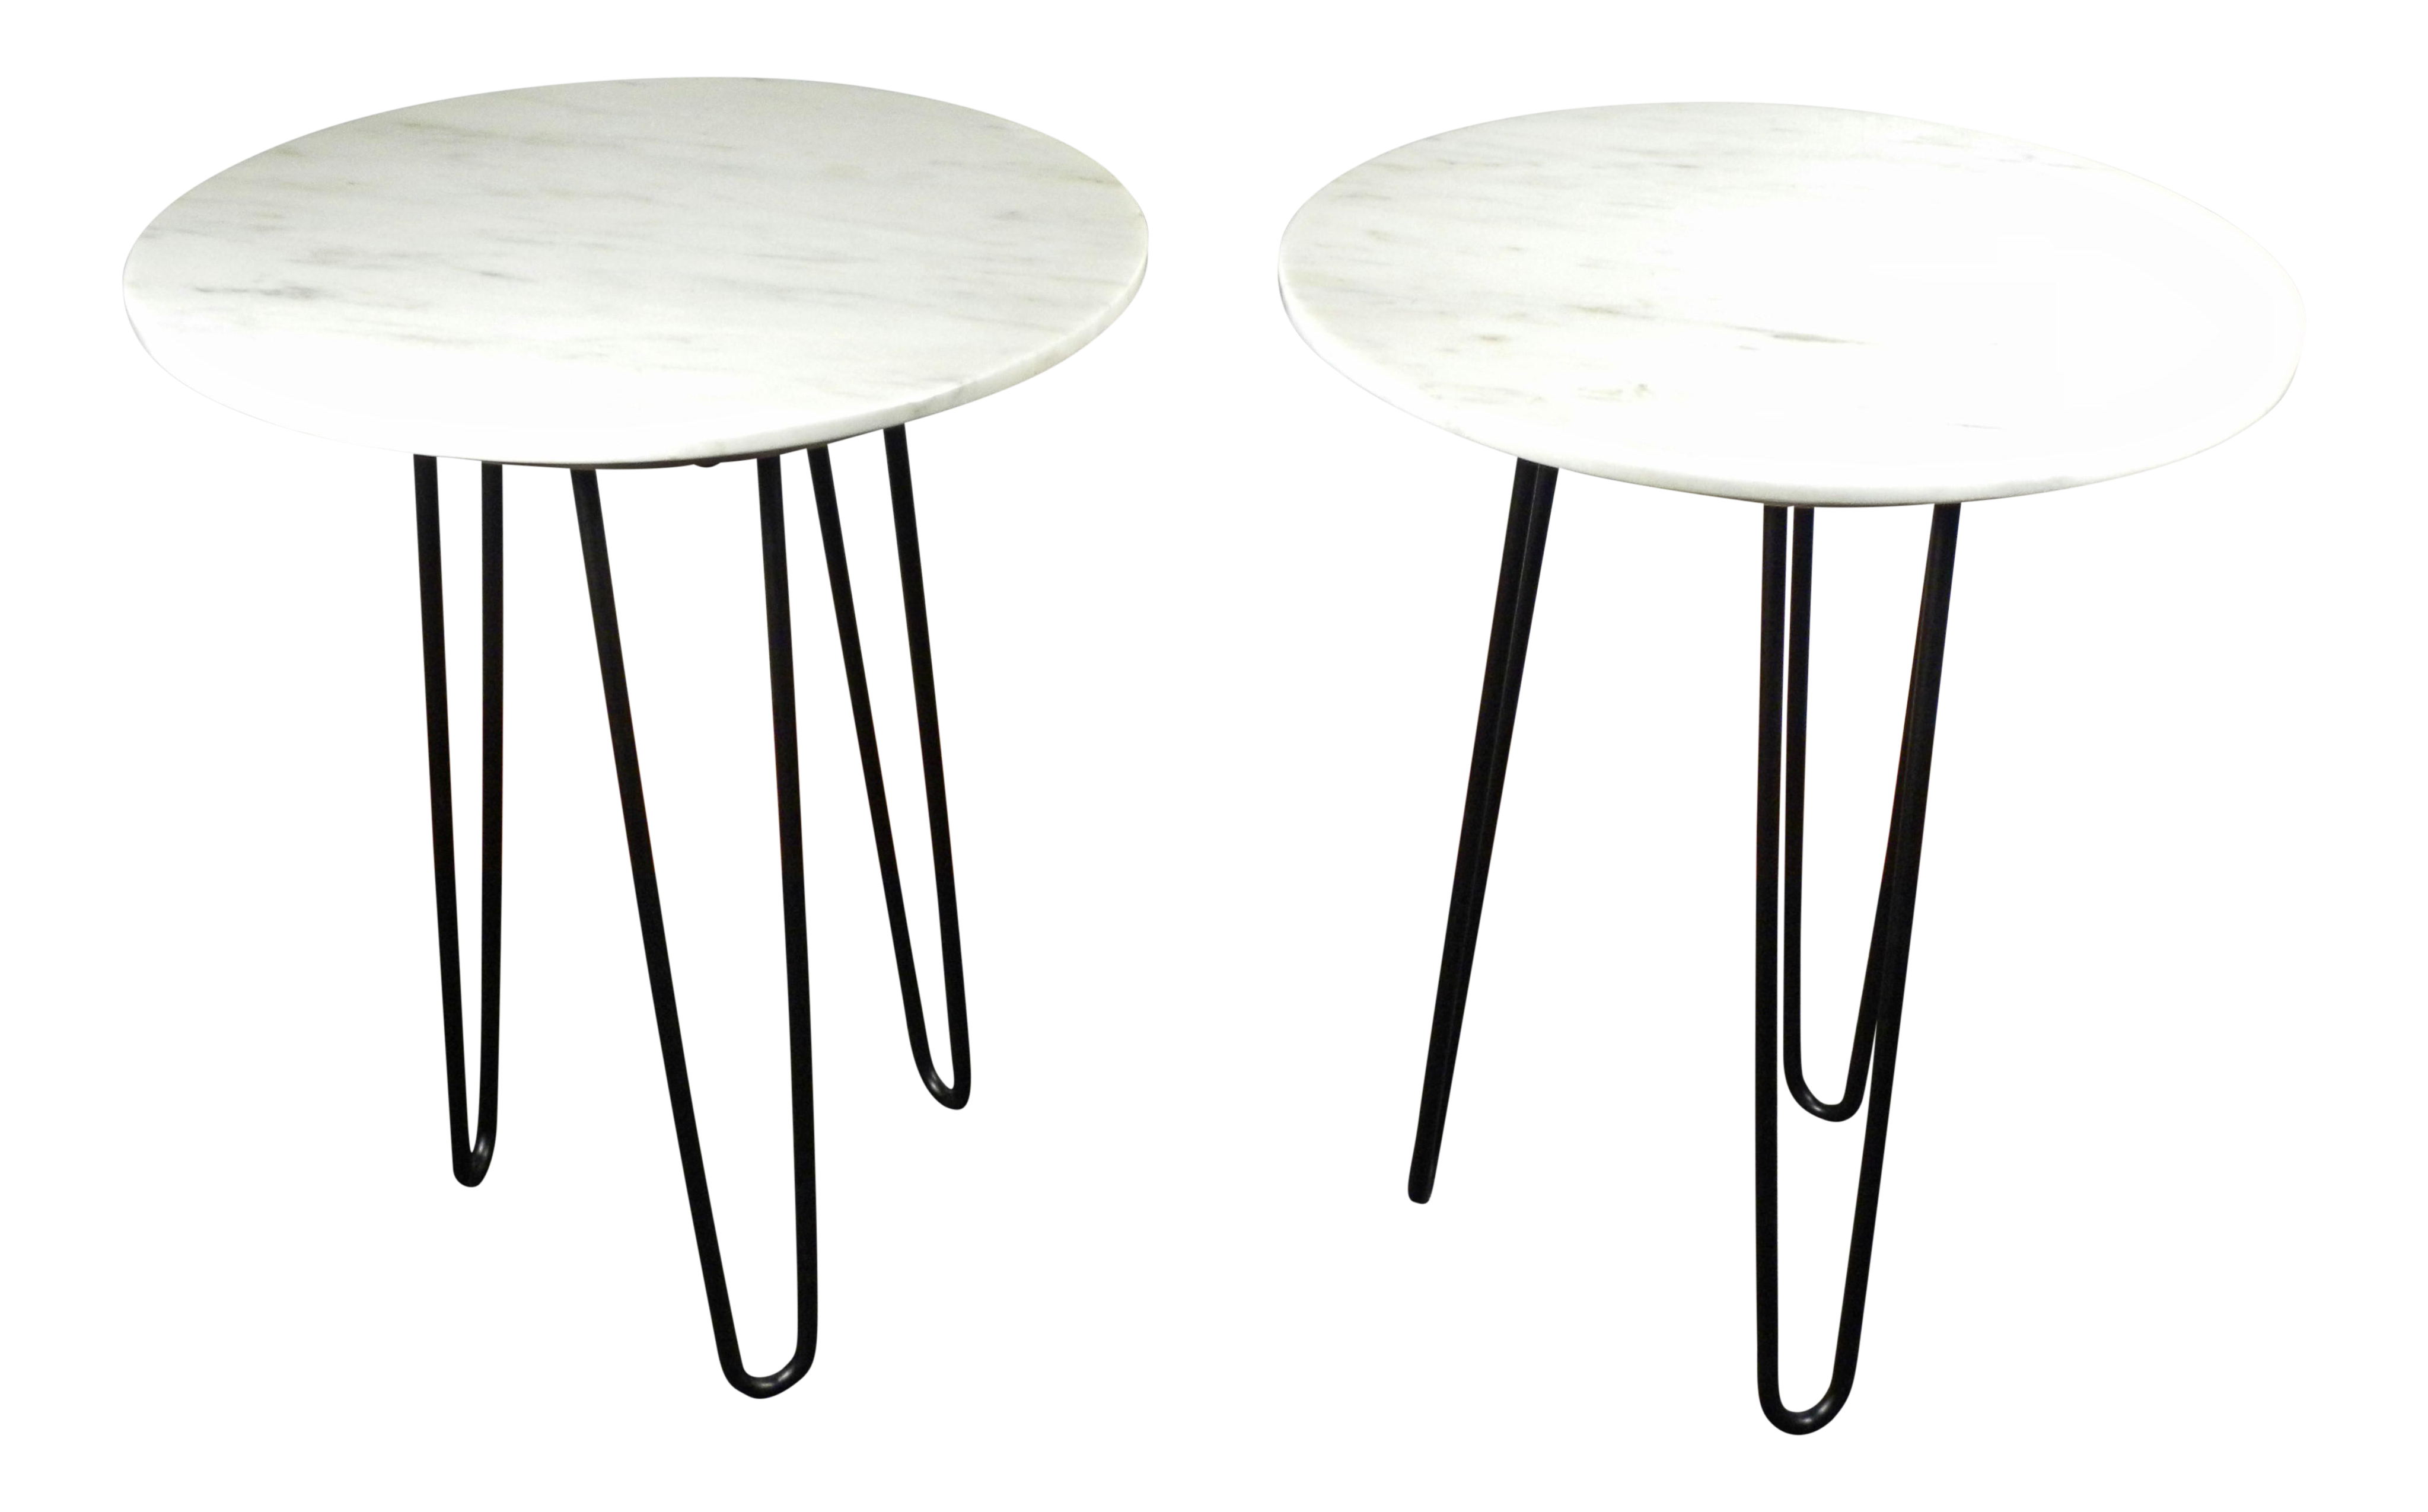 vintage mid century marble end tables accent night stands pair chairish dining table sheet slender console inch deep chest drawers tall square steel legs drum set cymbals nesting